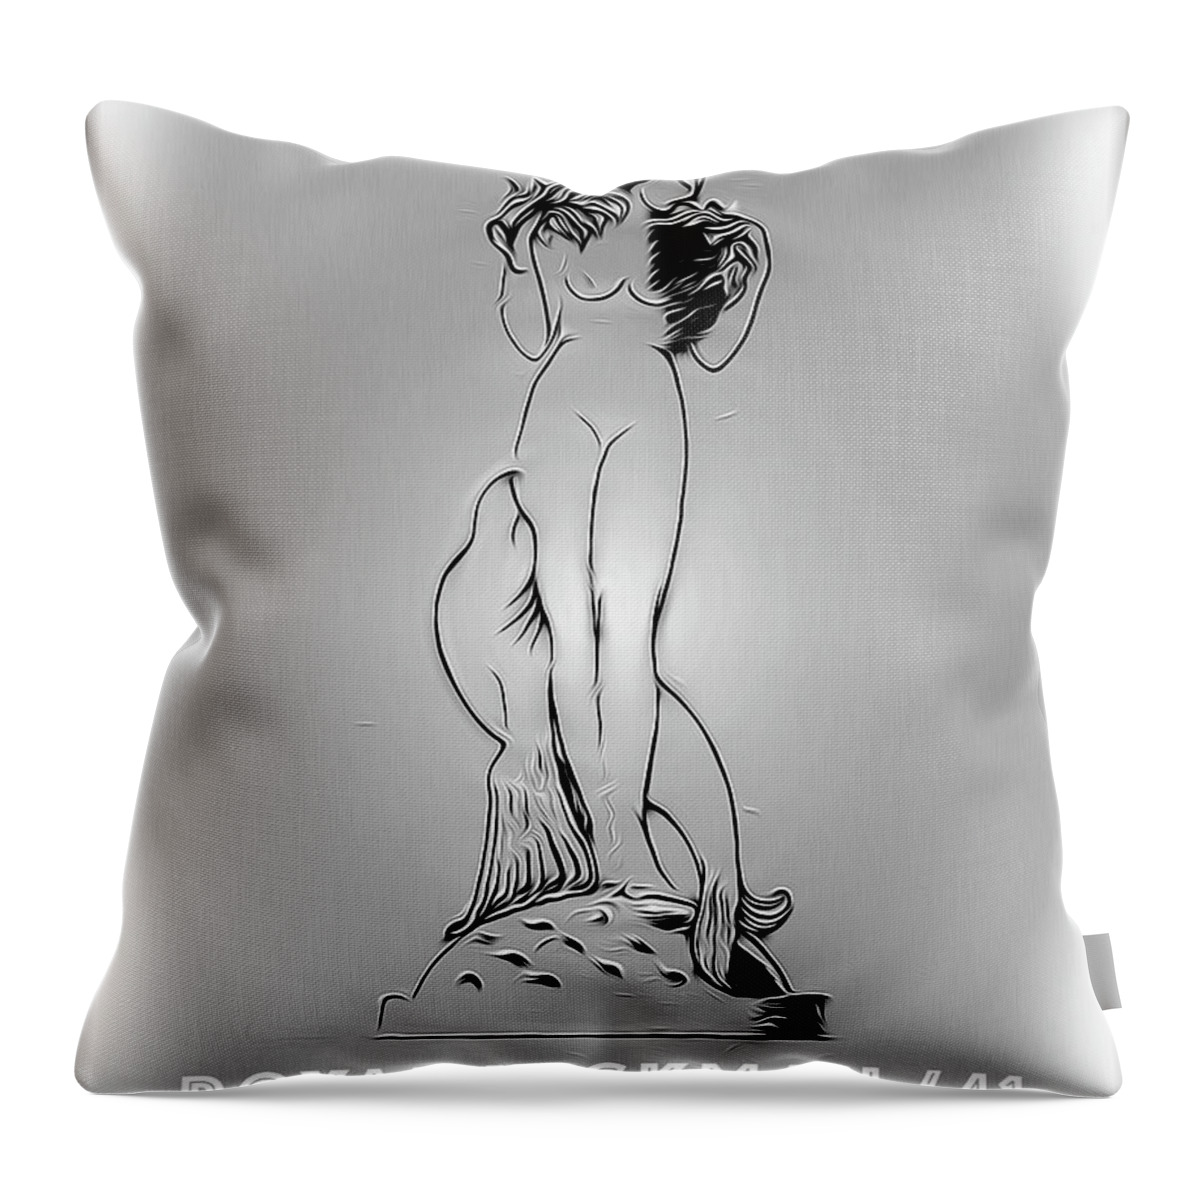 For Private Use Throw Pillow featuring the digital art Royal Hickman 41 2 by Joe Paradis